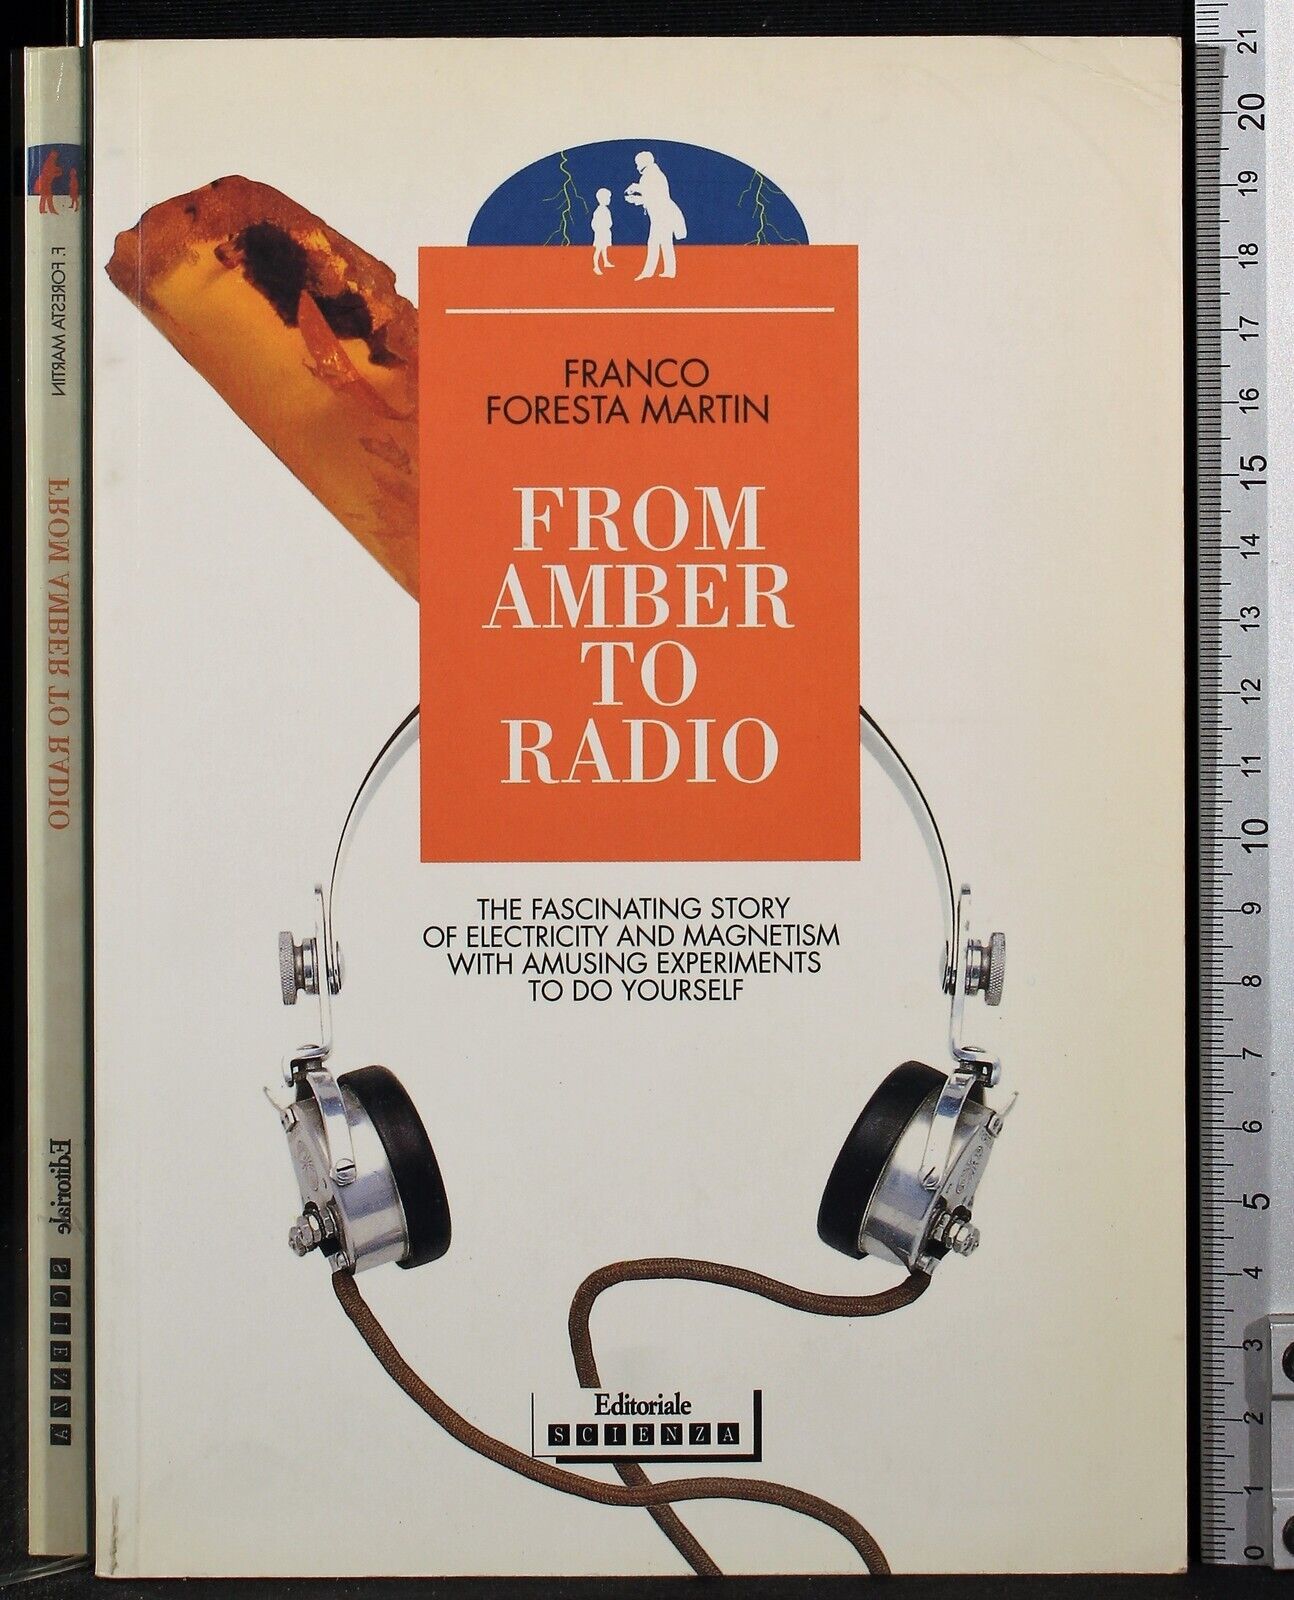 From amber to radio